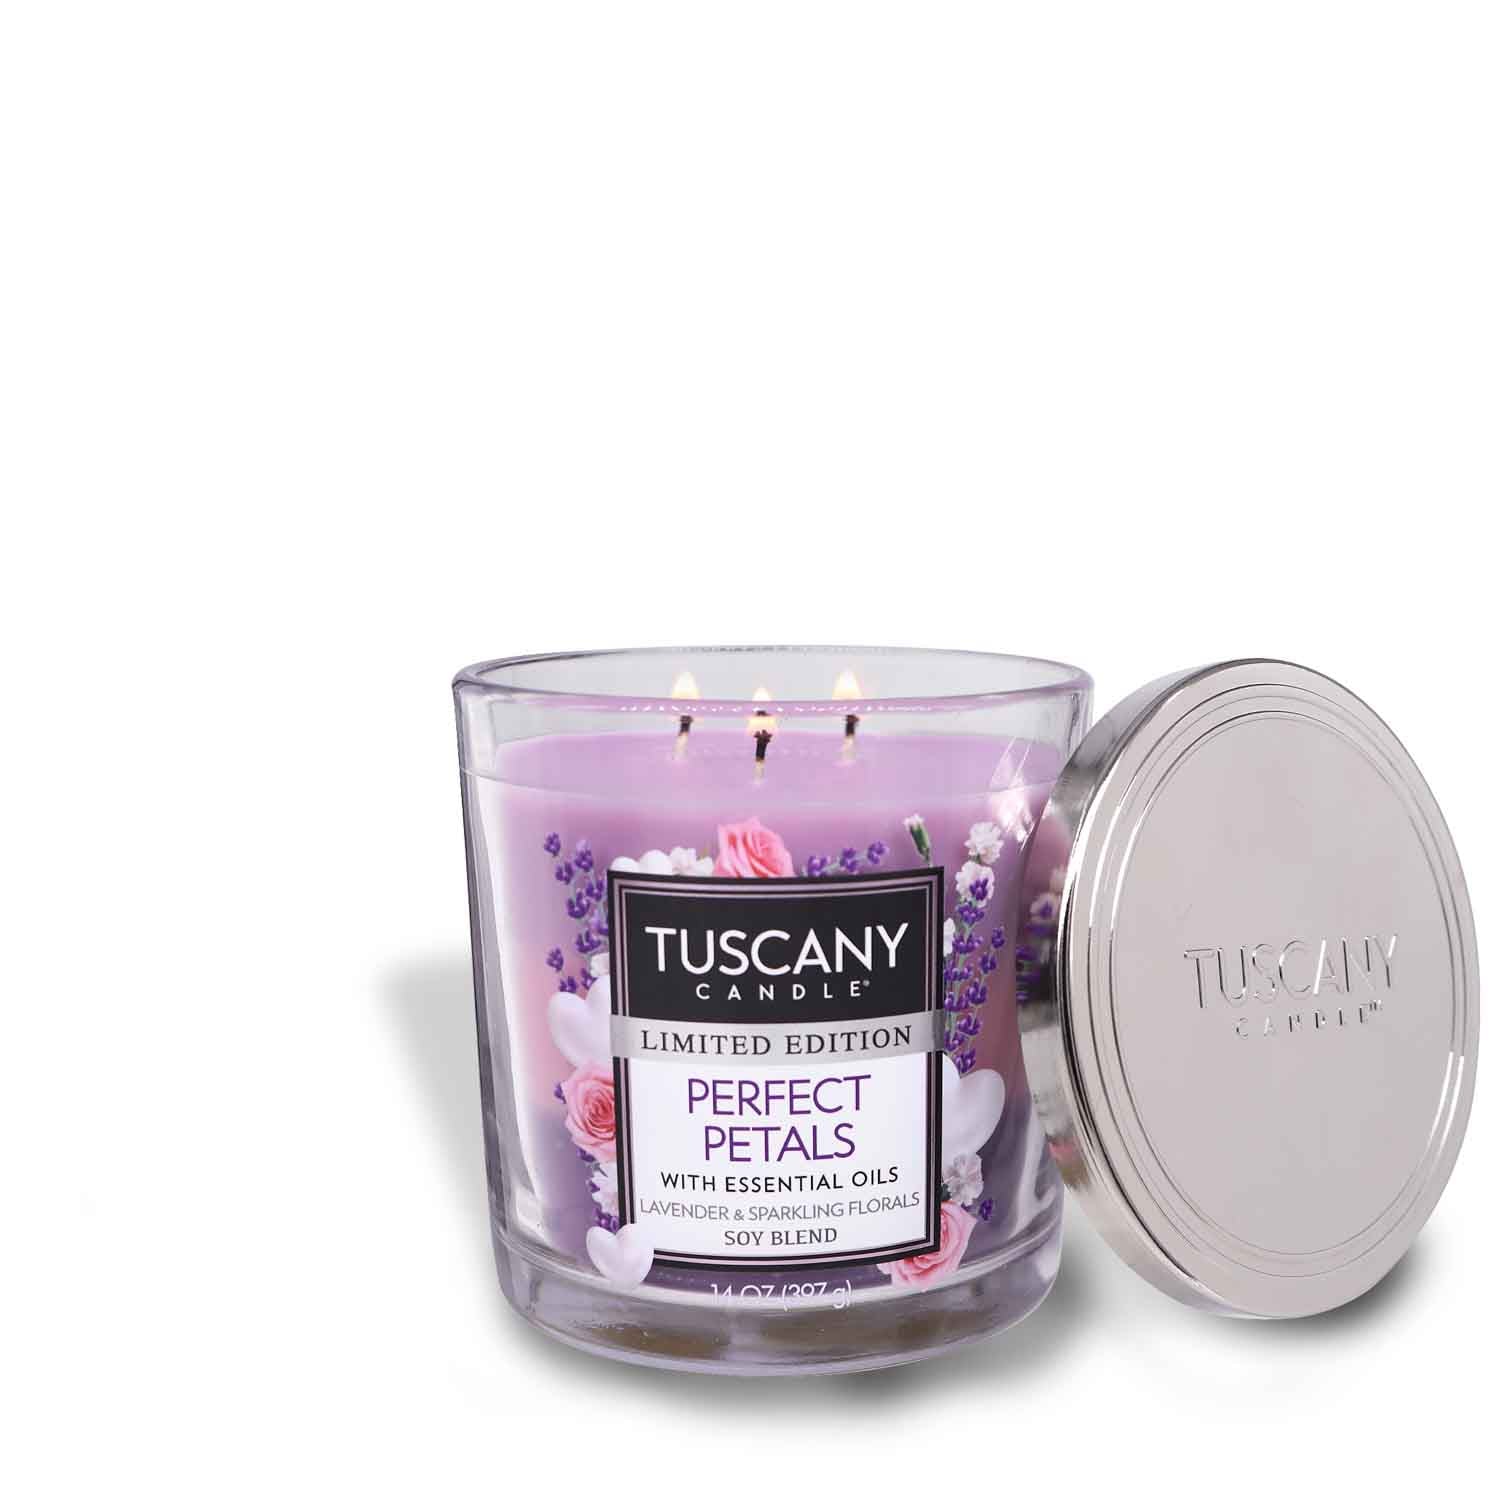 Tuscany Candle® Perfect Petals Long-Lasting Scented Jar Candle (14 oz), ideal for a romantic ambiance or relaxing moments.